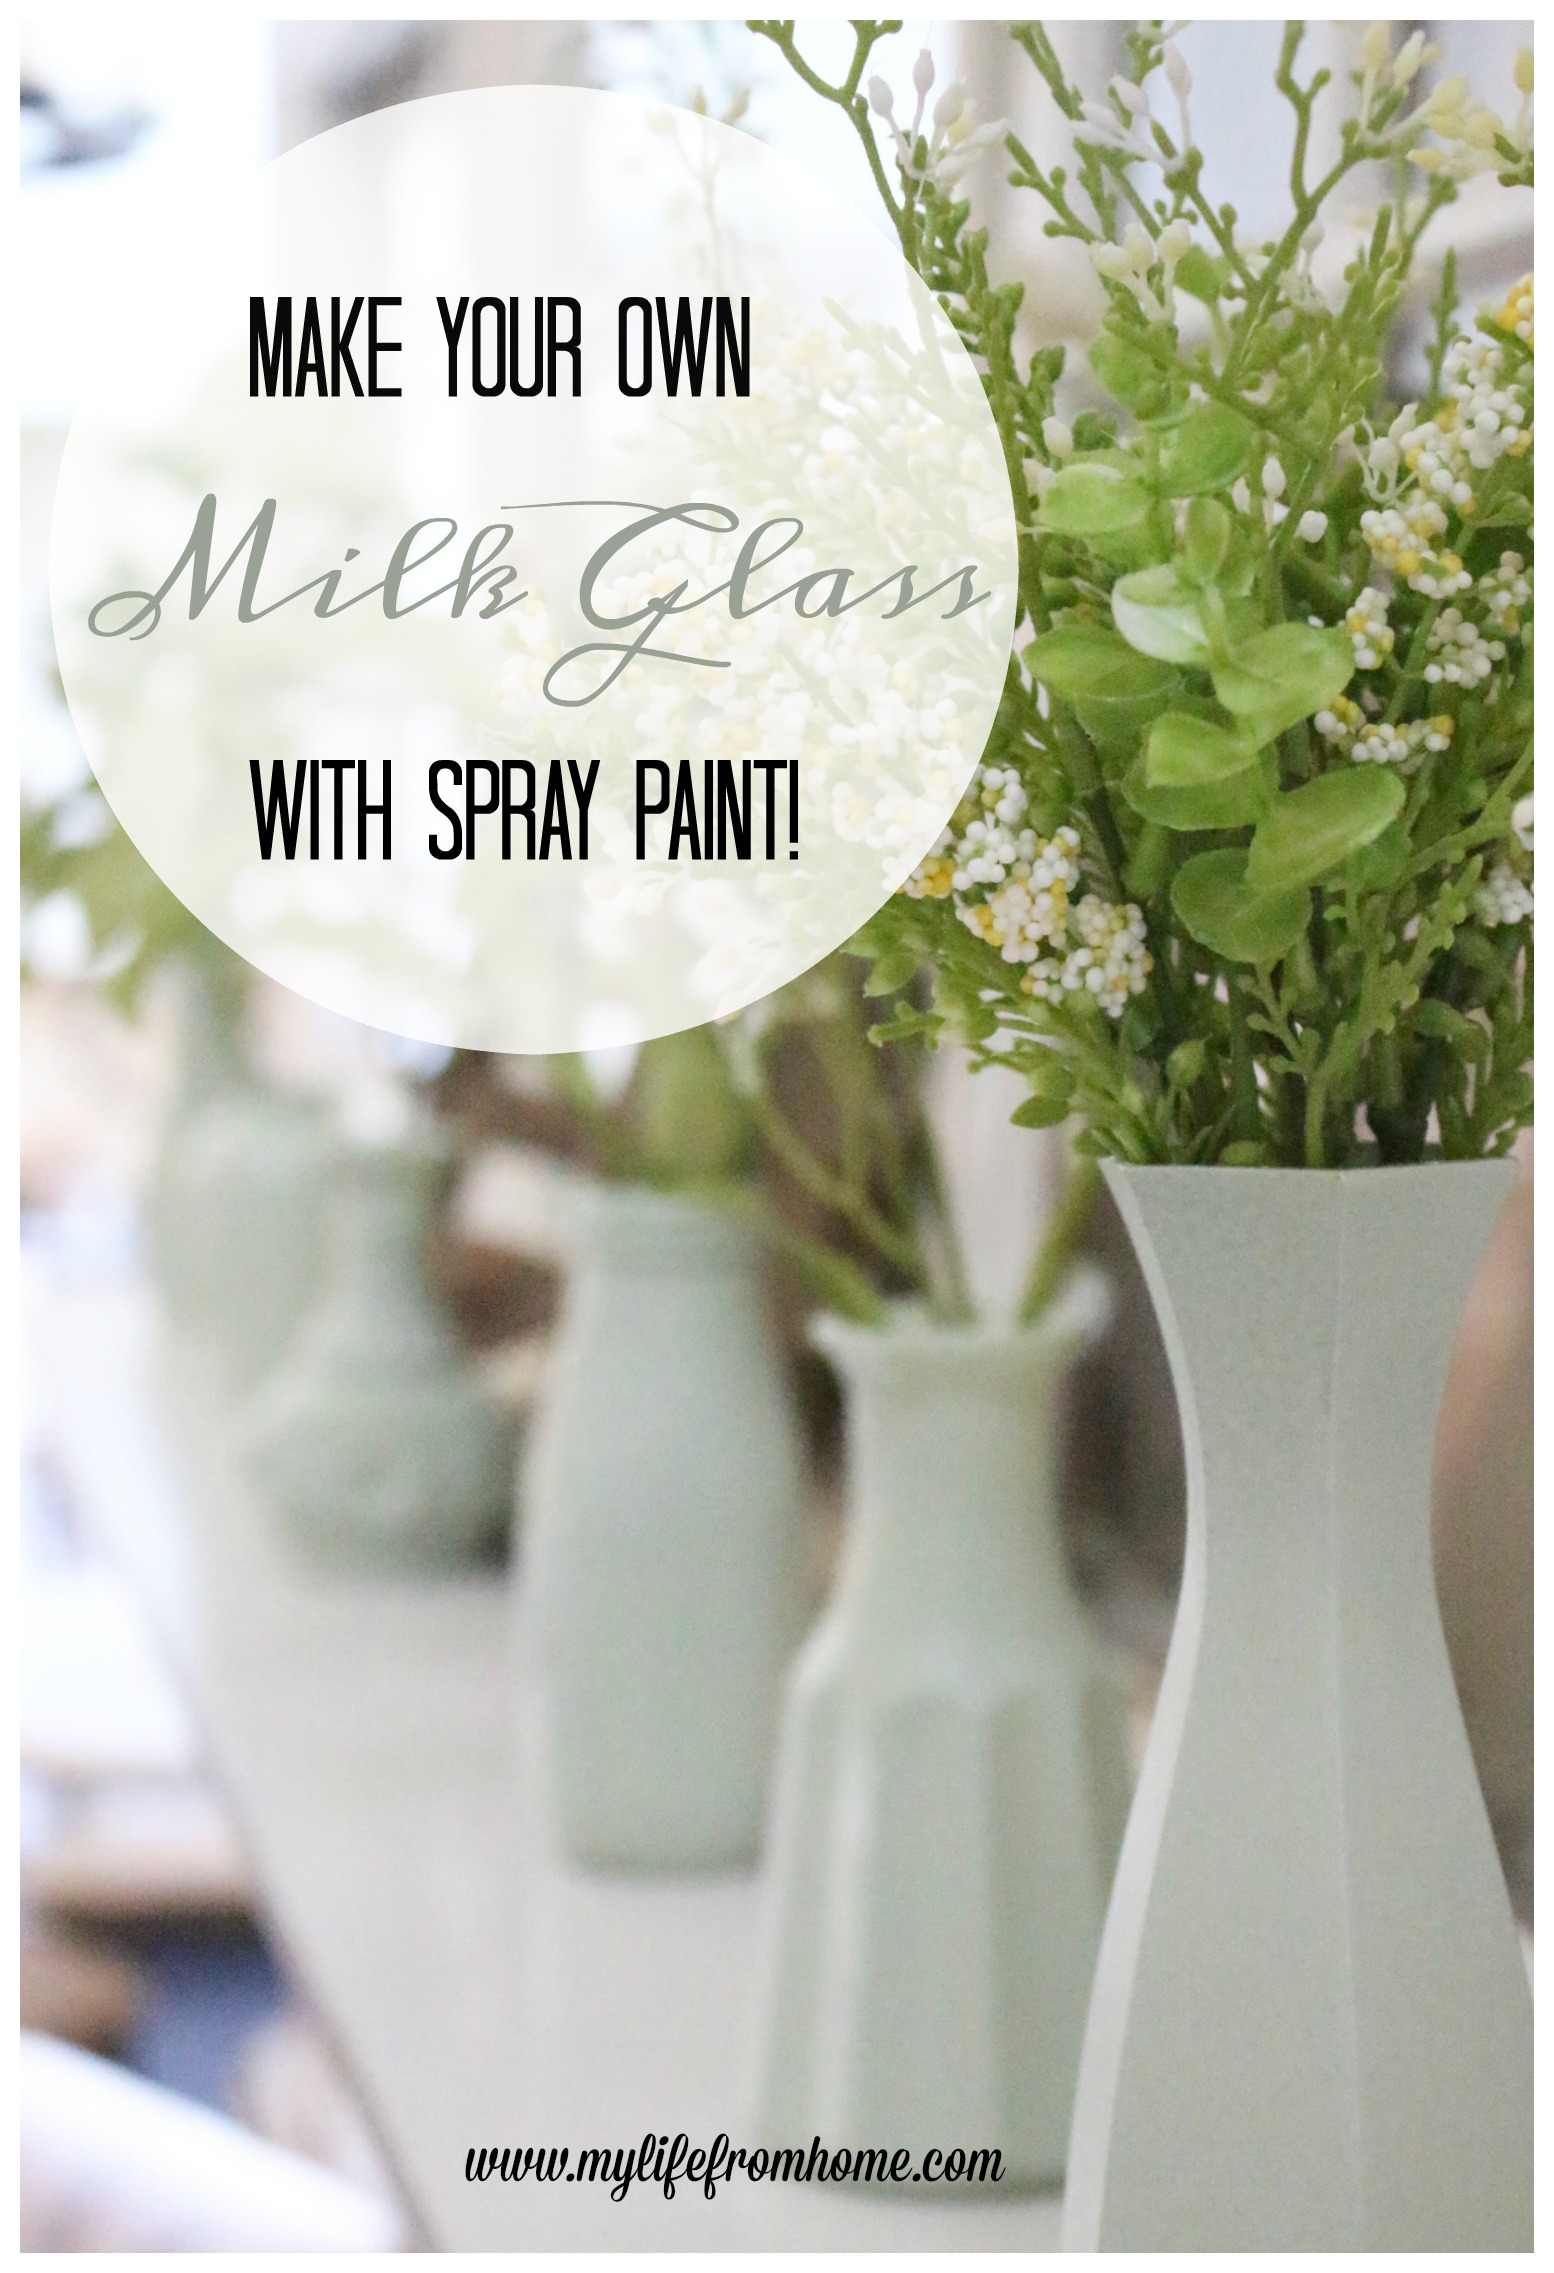 Make Your Own Milk Glass with Spray Paint- milk glass- faux milk glass- spray paint milk glass- vintage glass effects- thrift store vase- painting vases- spring decor- mantel decor- spring mantel